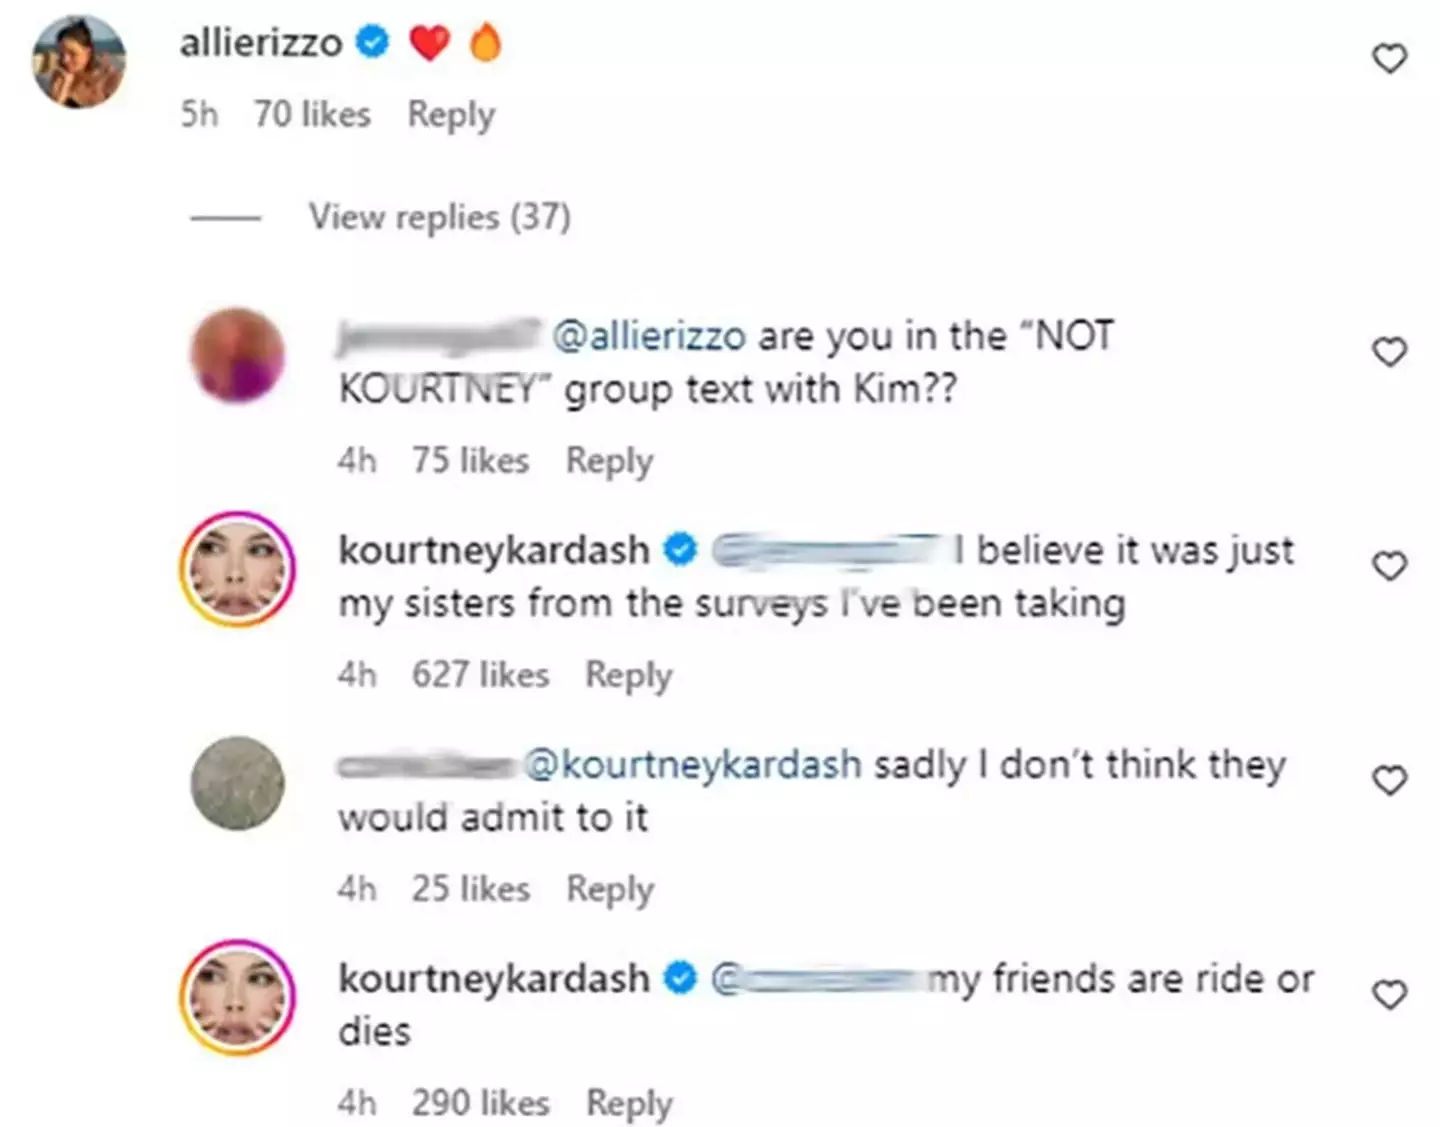 Kourtney threw shade at her sisters in an Instagram comment.